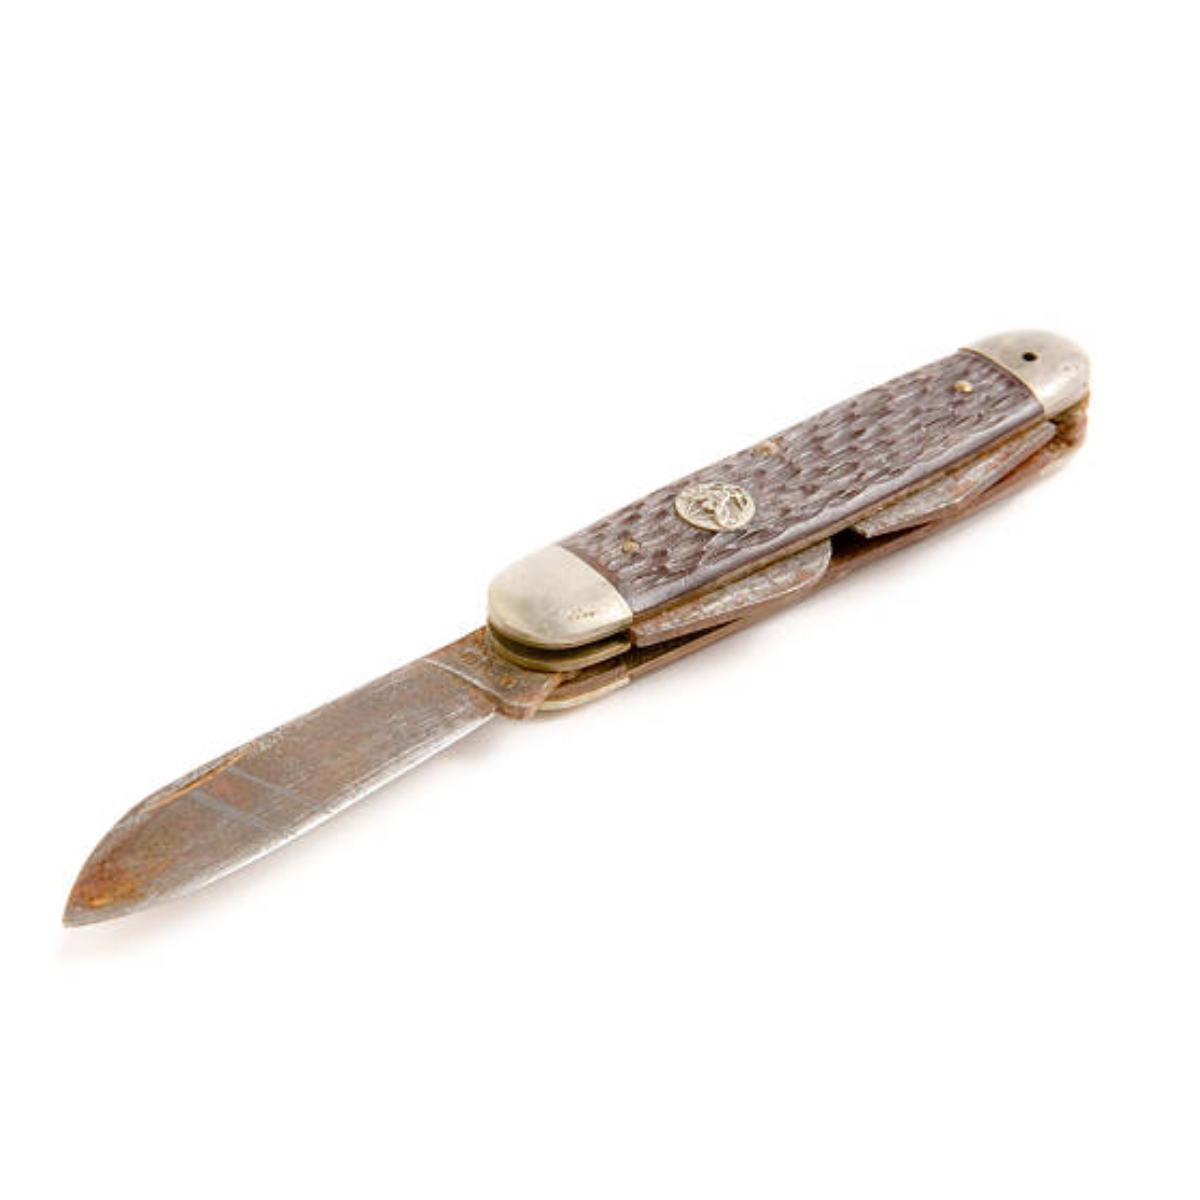 32. Exquisite Antique Pocket Knife: A Timeless 2nd Anniversary Gift for Him